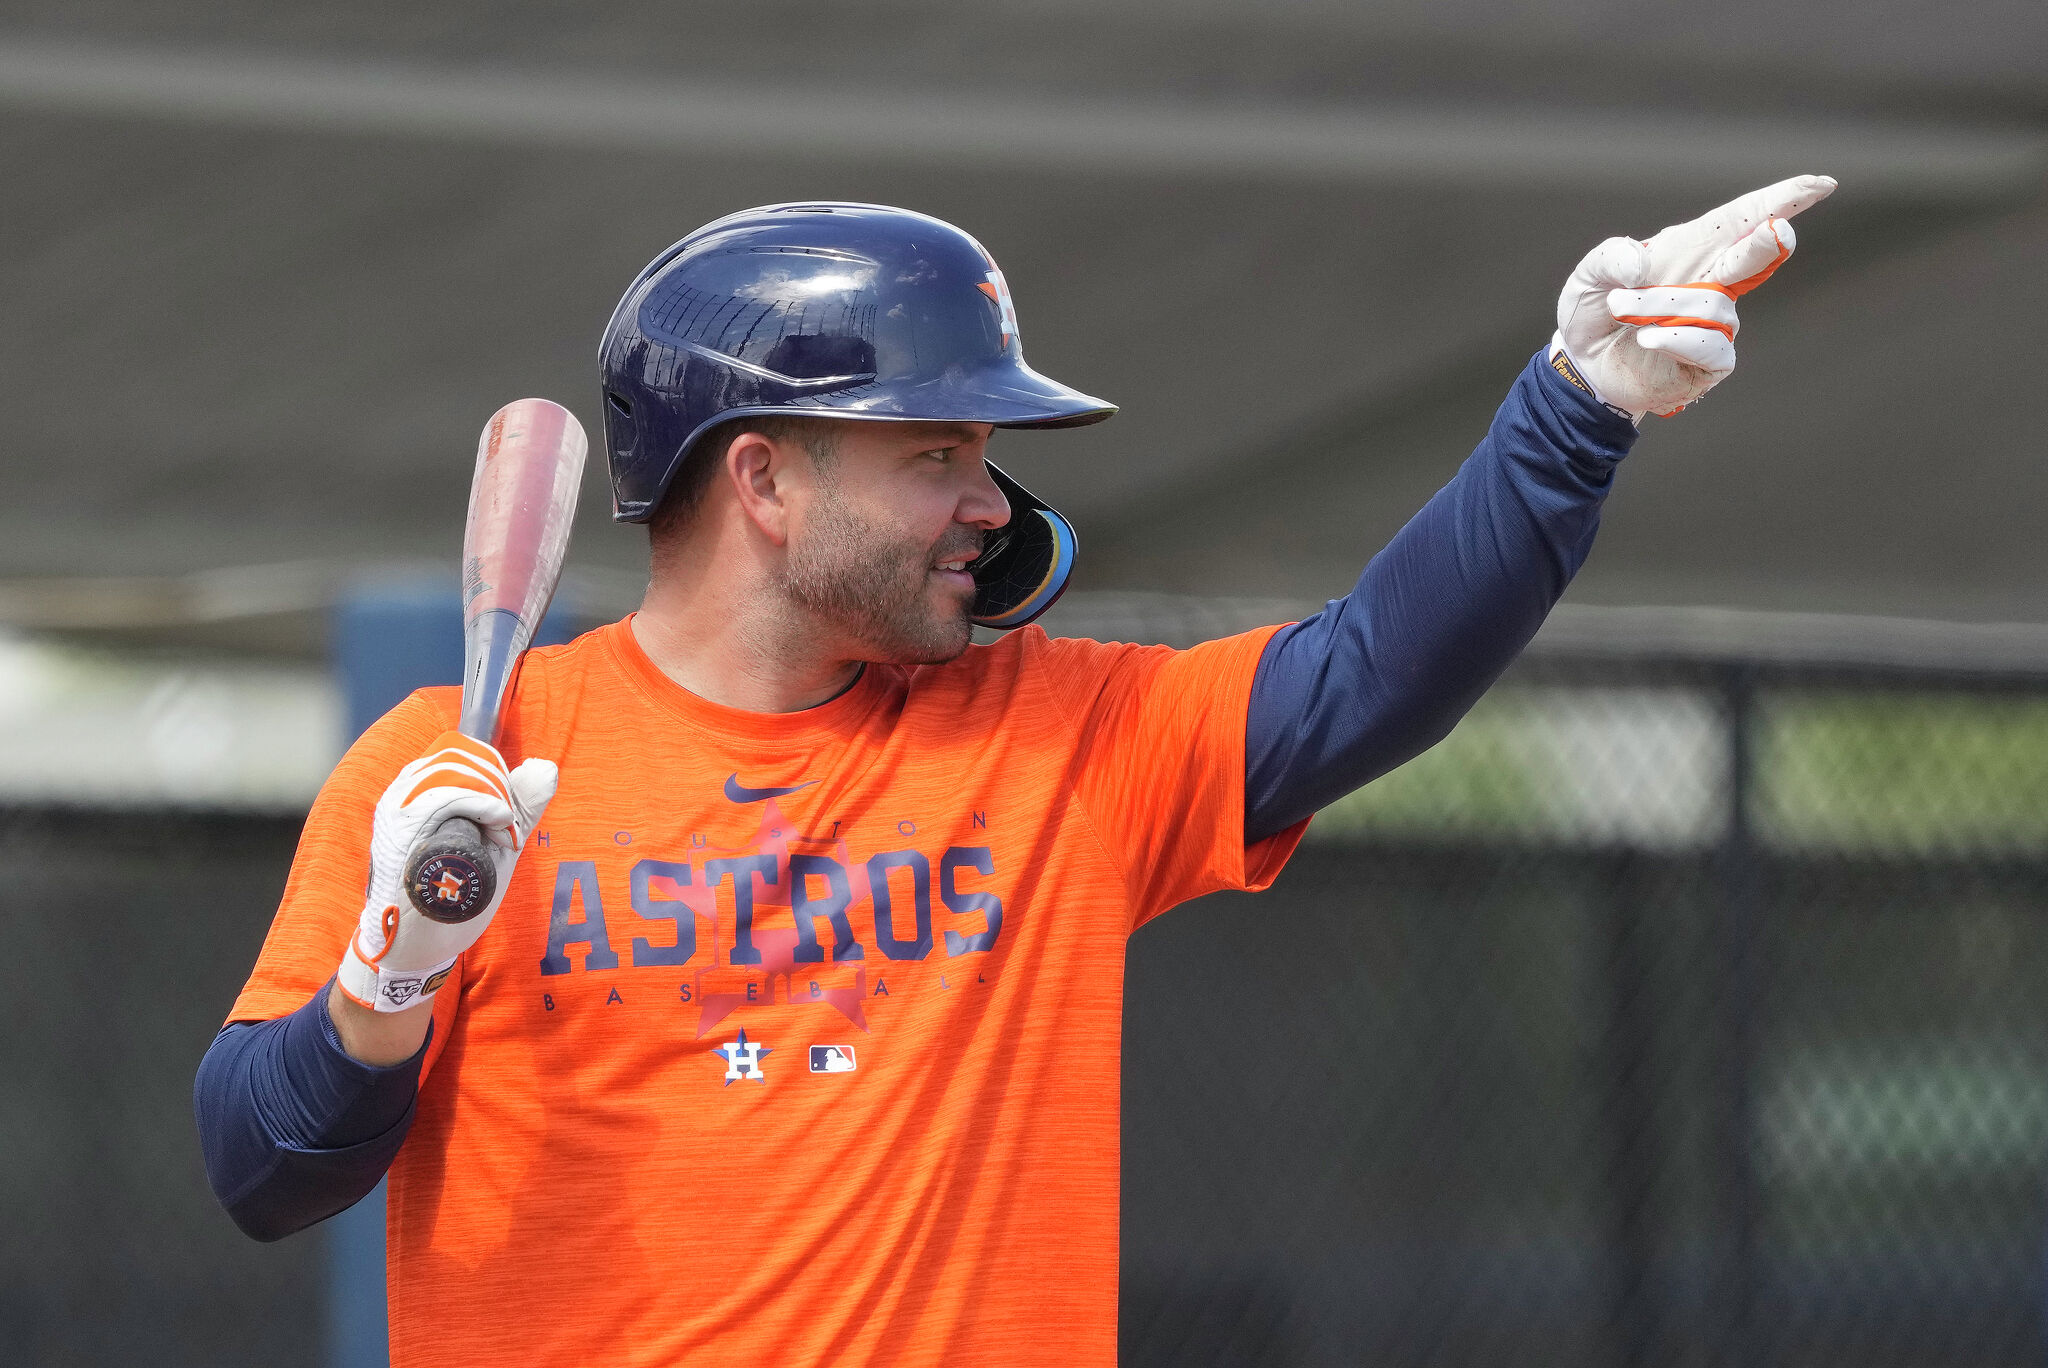 Jose Altuve to make long-awaited return to Astros this weekend